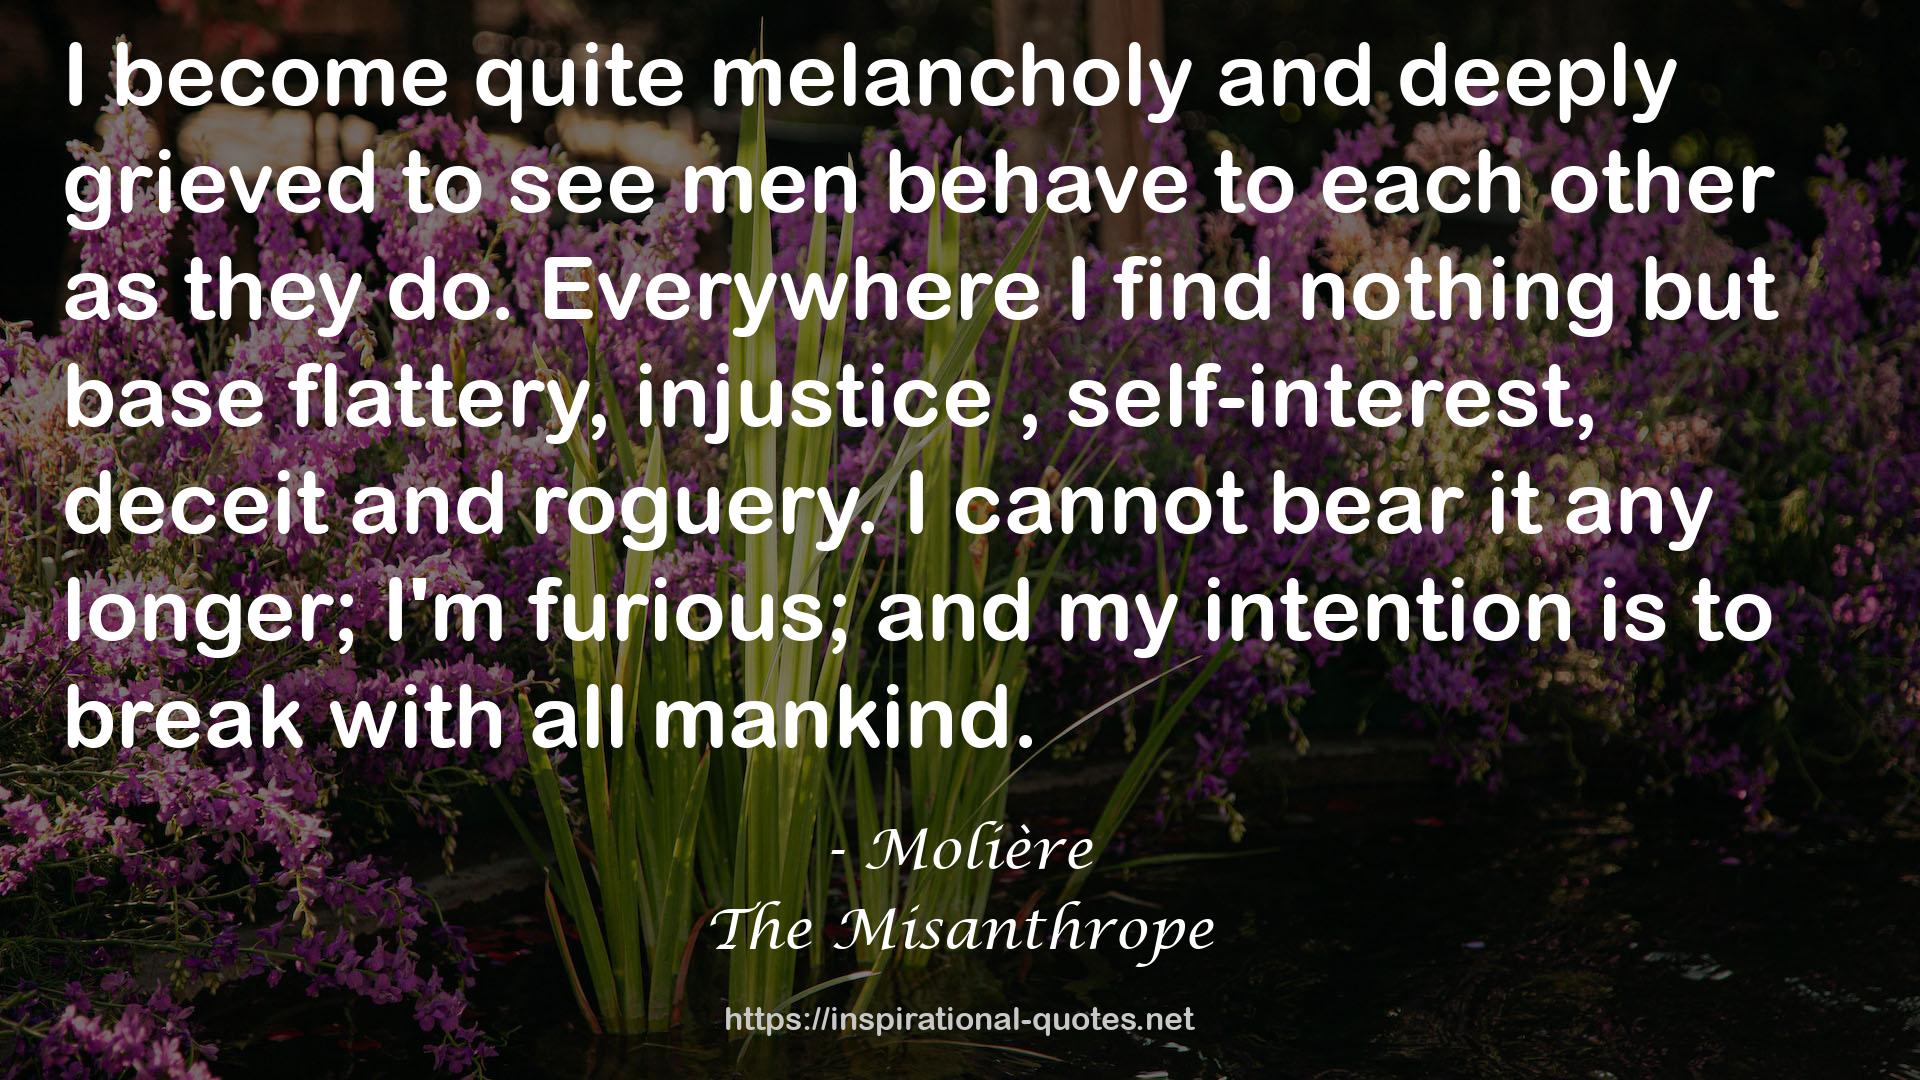 The Misanthrope QUOTES